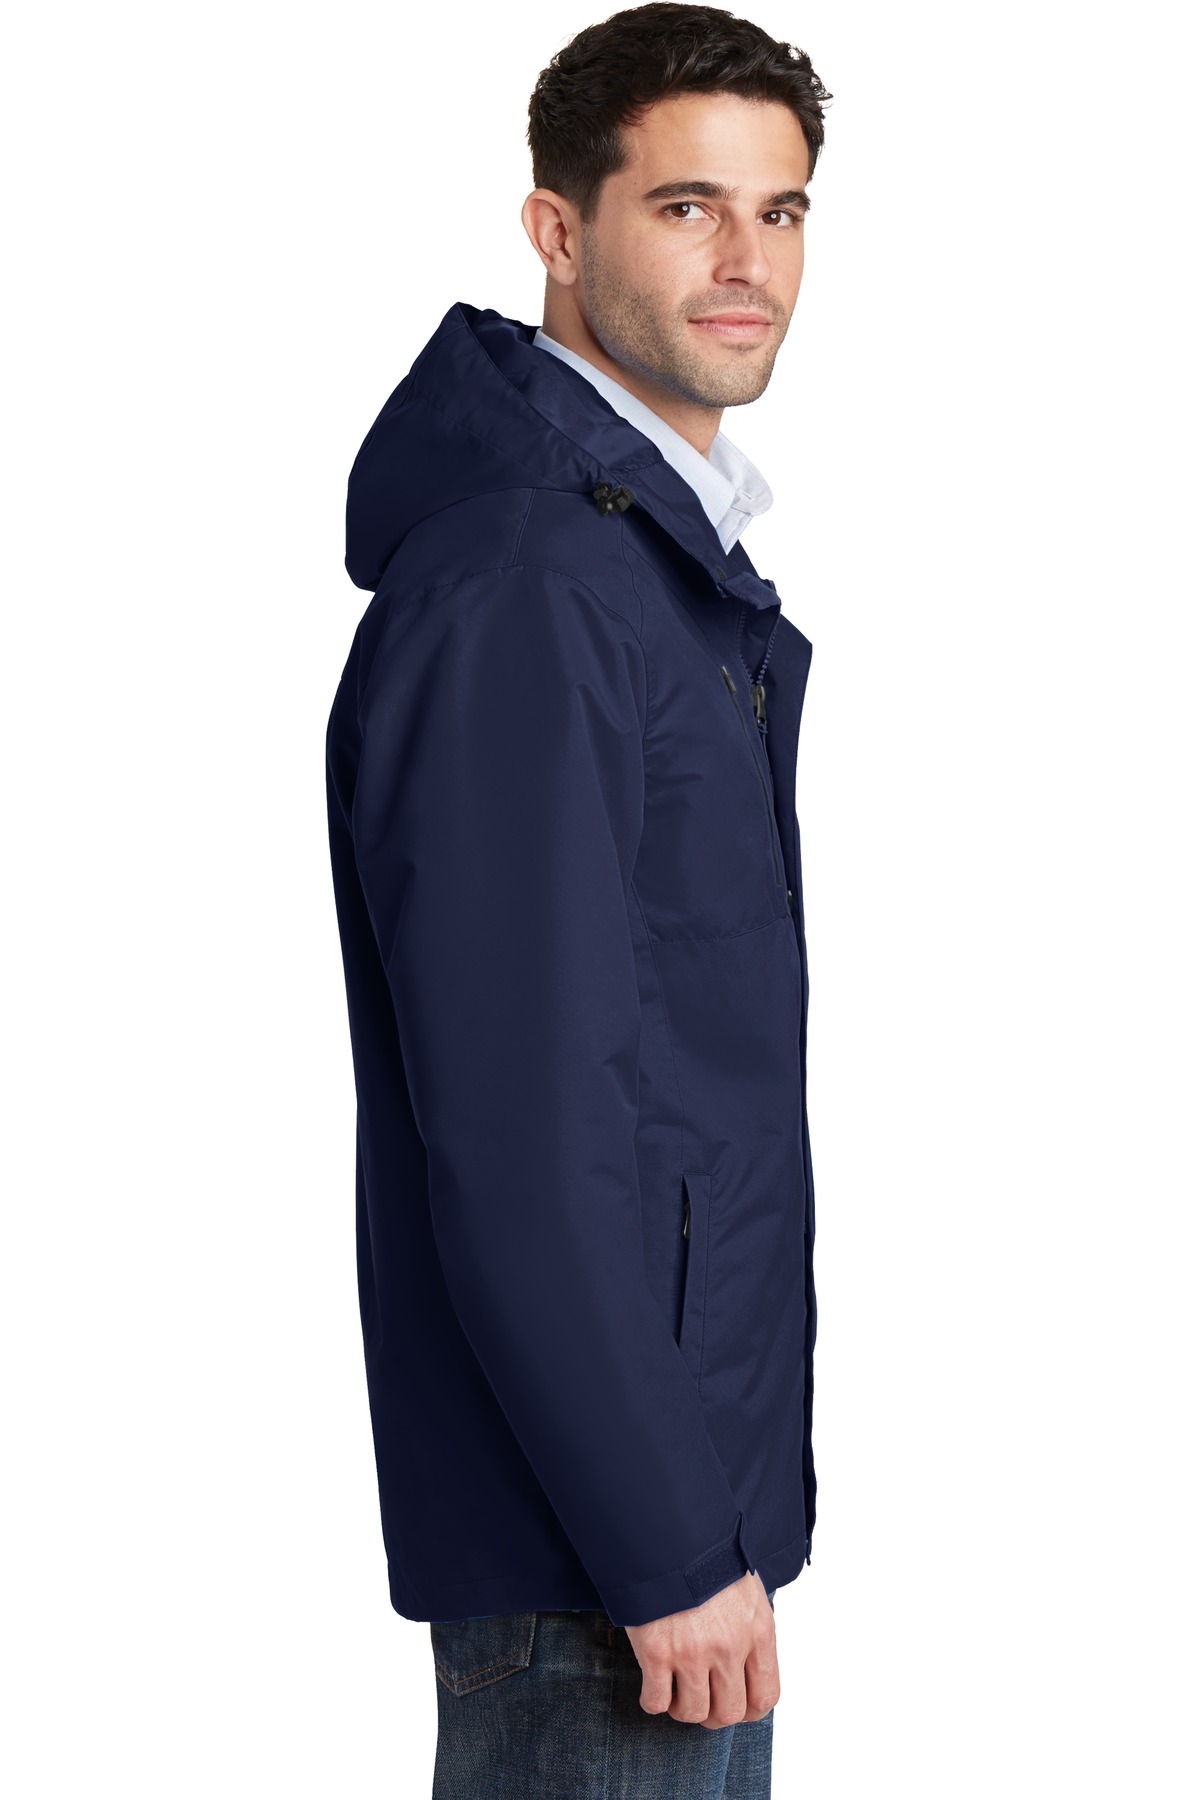 Port Authority All Conditions Jacket-M (True Navy) - image 3 of 6